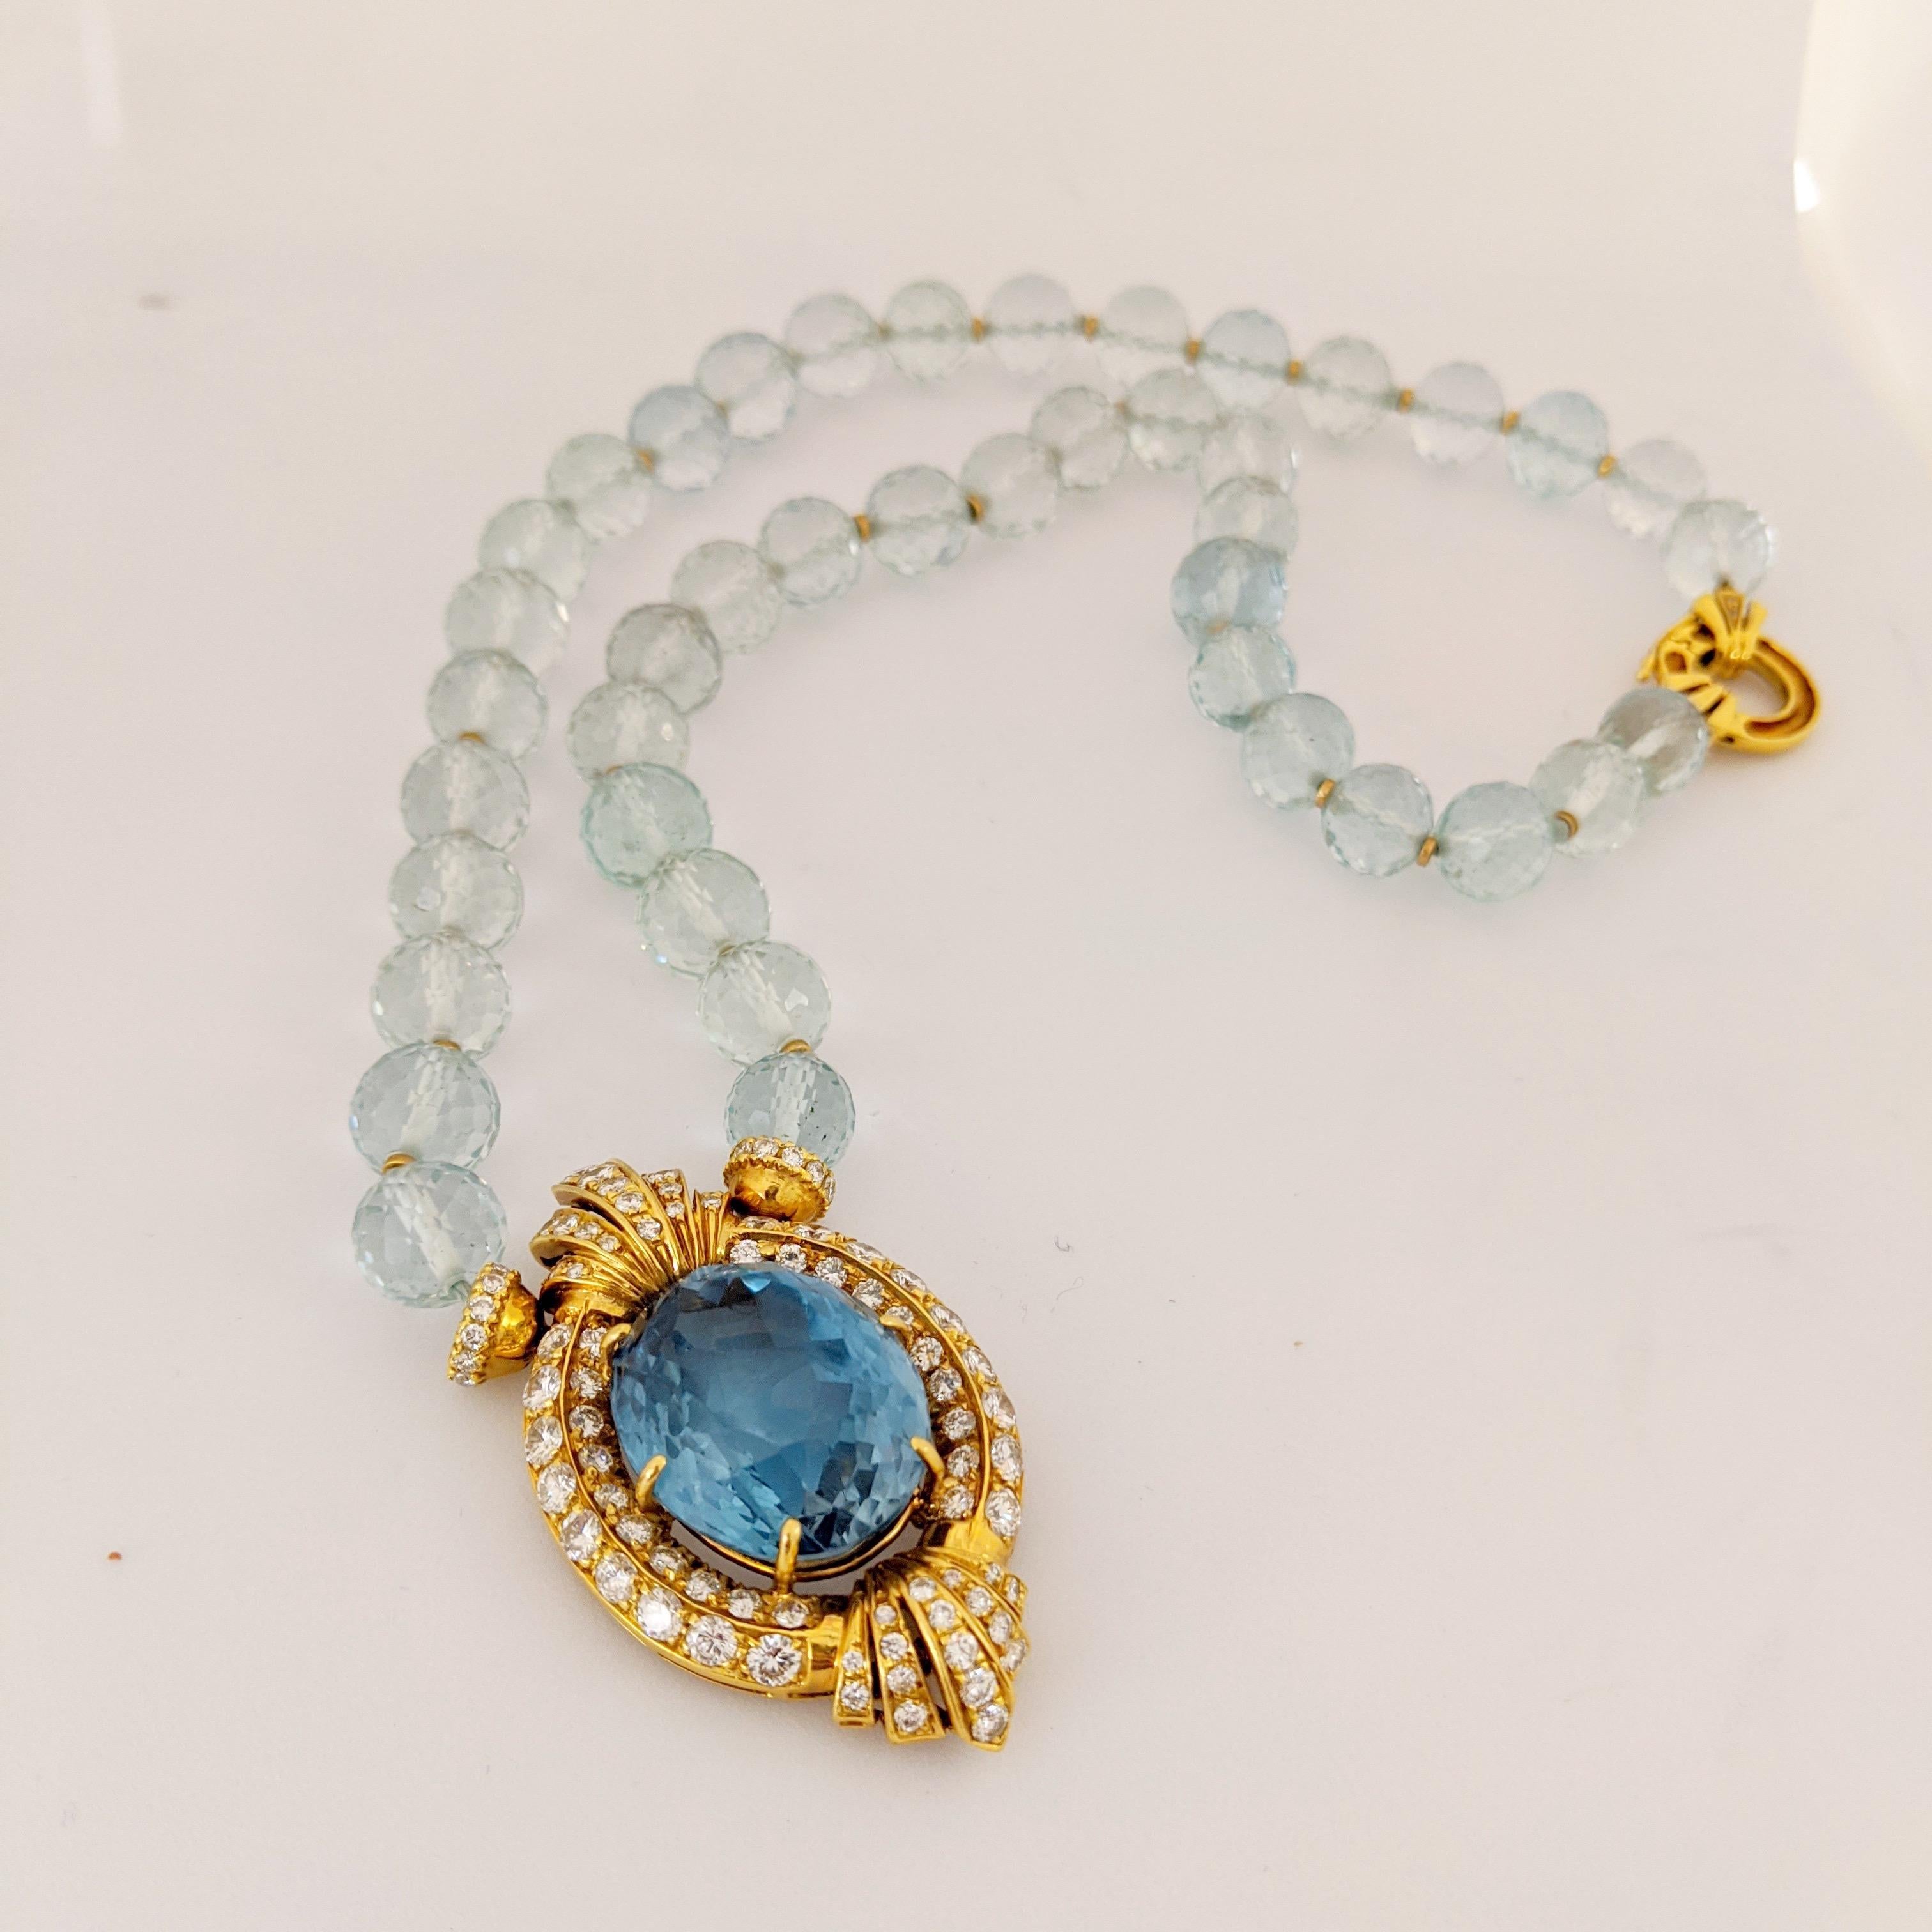 Women's or Men's 18 Karat Gold Diamonds and 43.50 Carat Blue Topaz Necklace with Aquamarine Beads For Sale